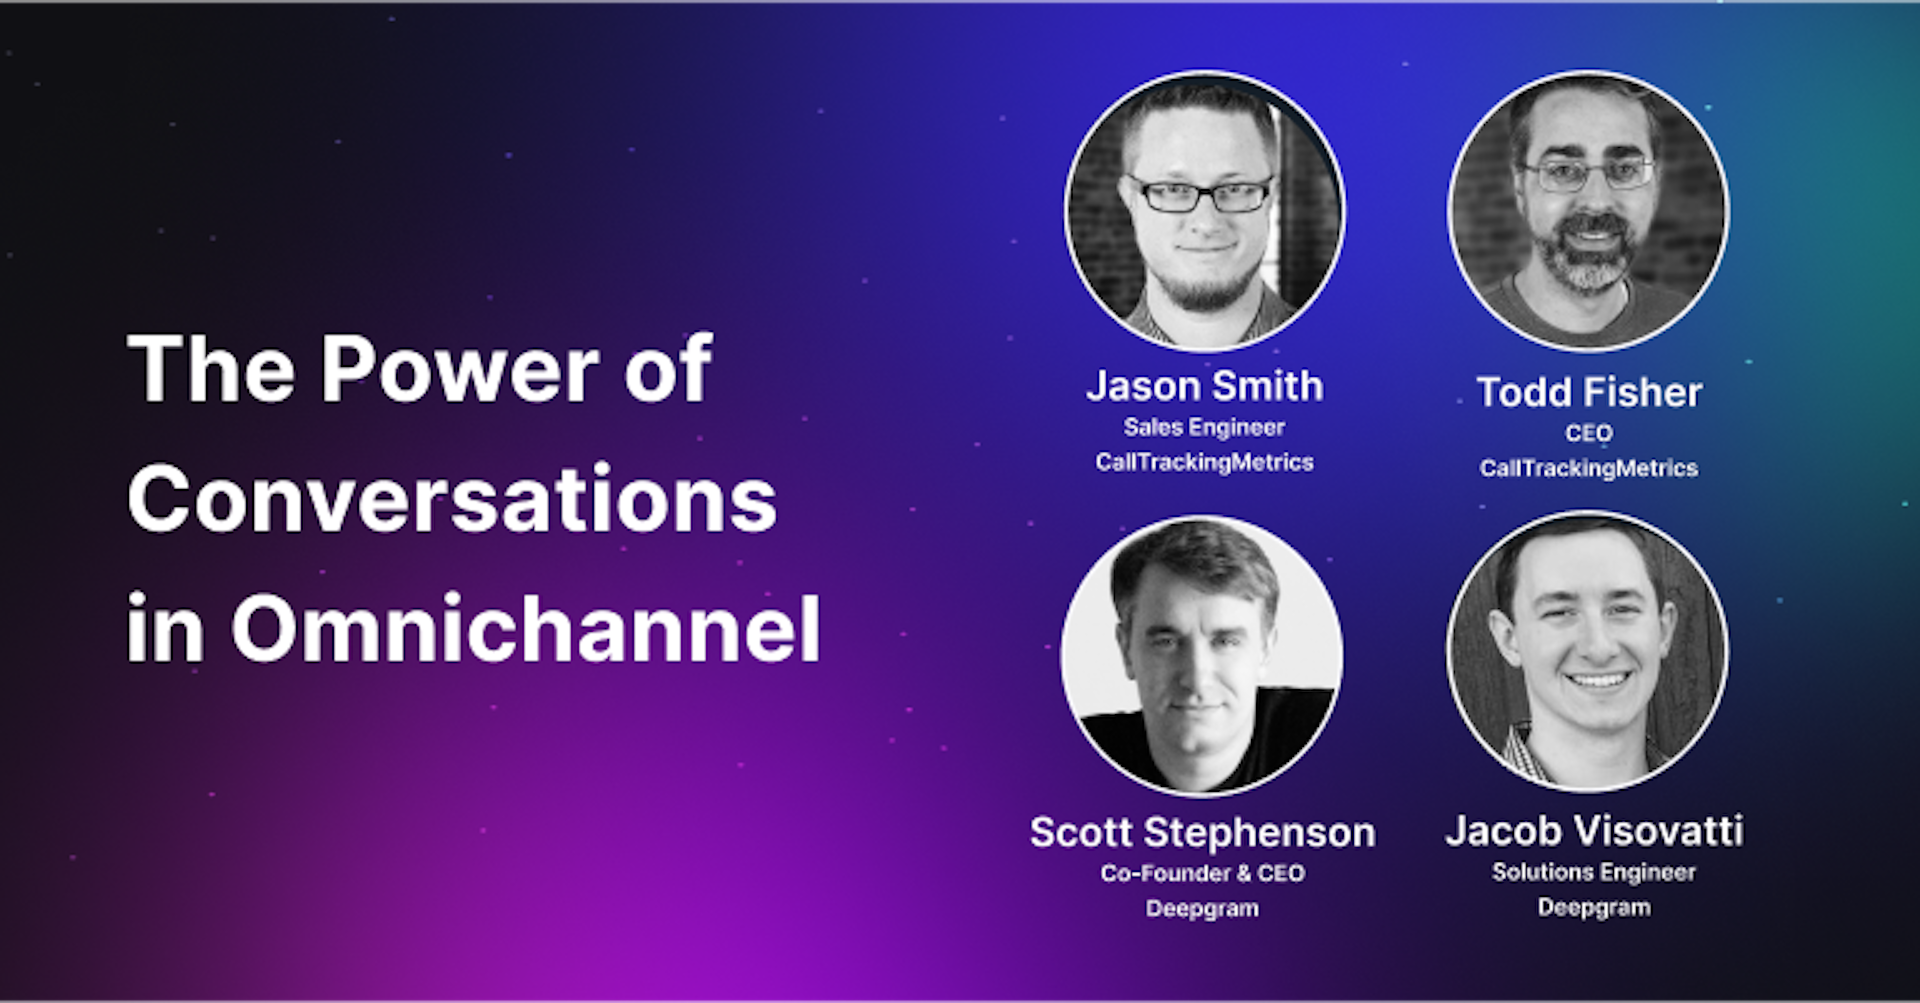 The Power of Conversations in Omnichannel